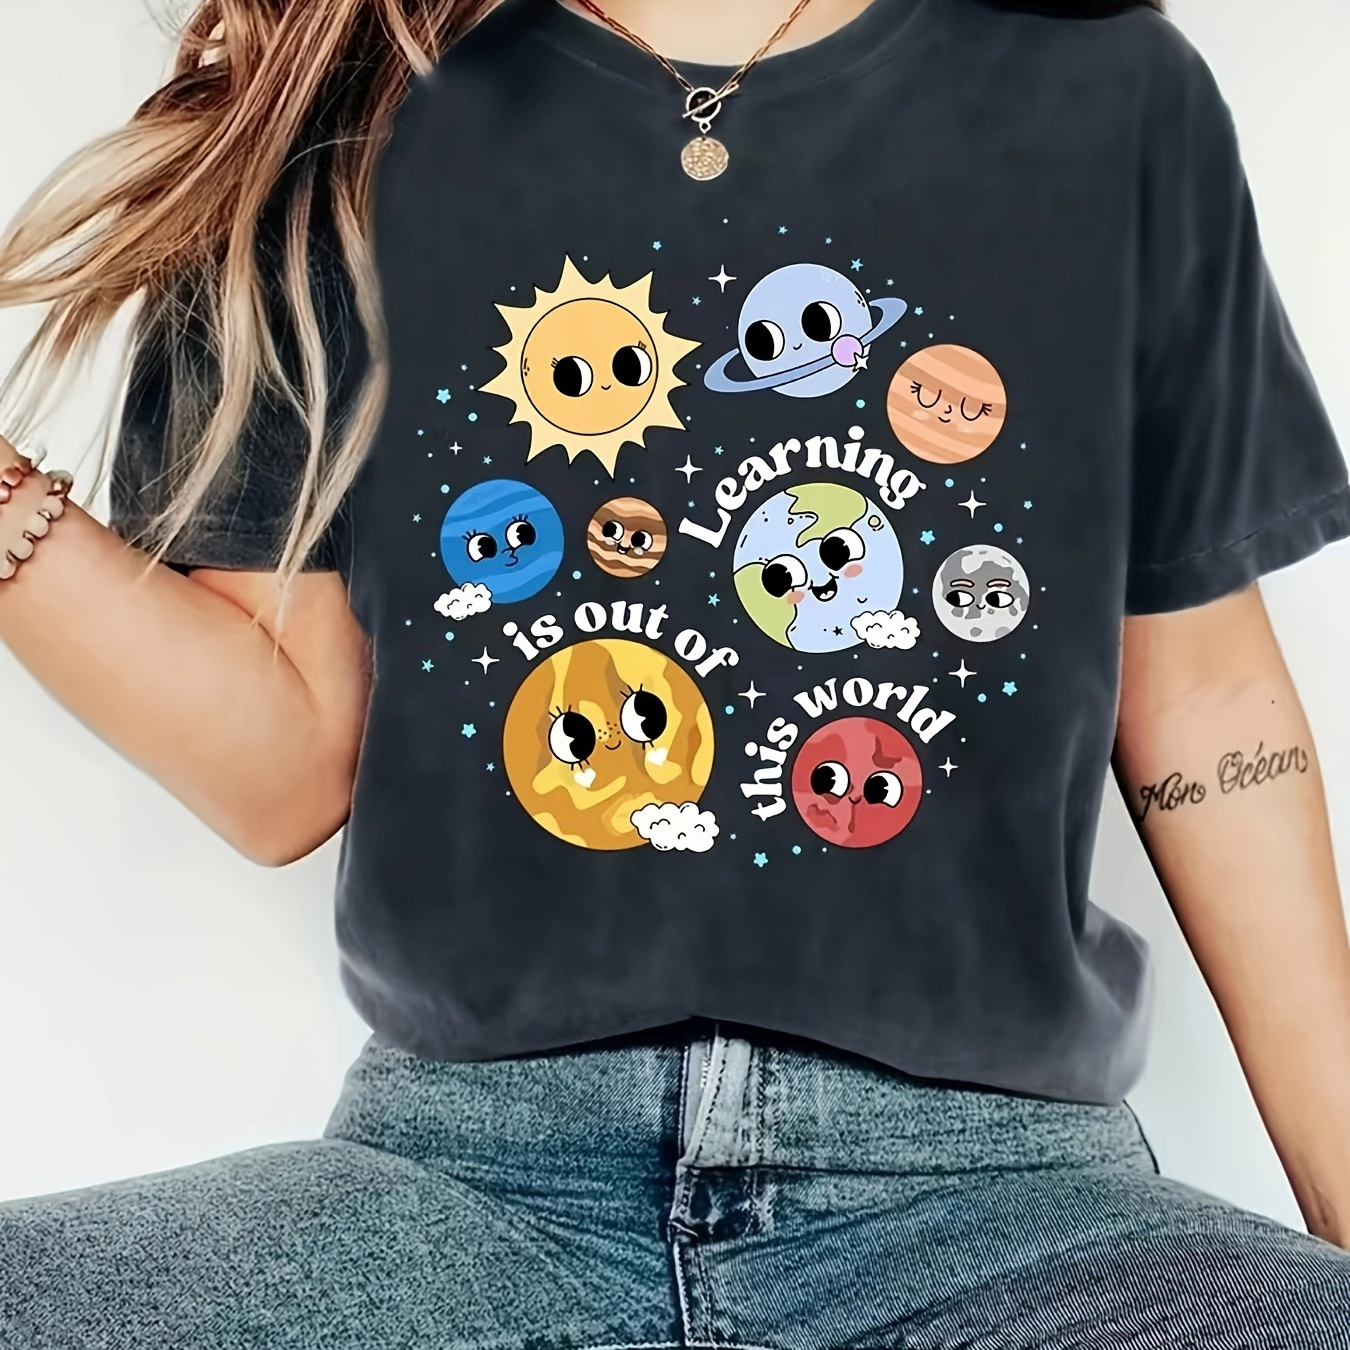 

Planet Print Crew Neck T-shirt, Short Sleeve Casual Top For Spring & Summer, Women's Clothing